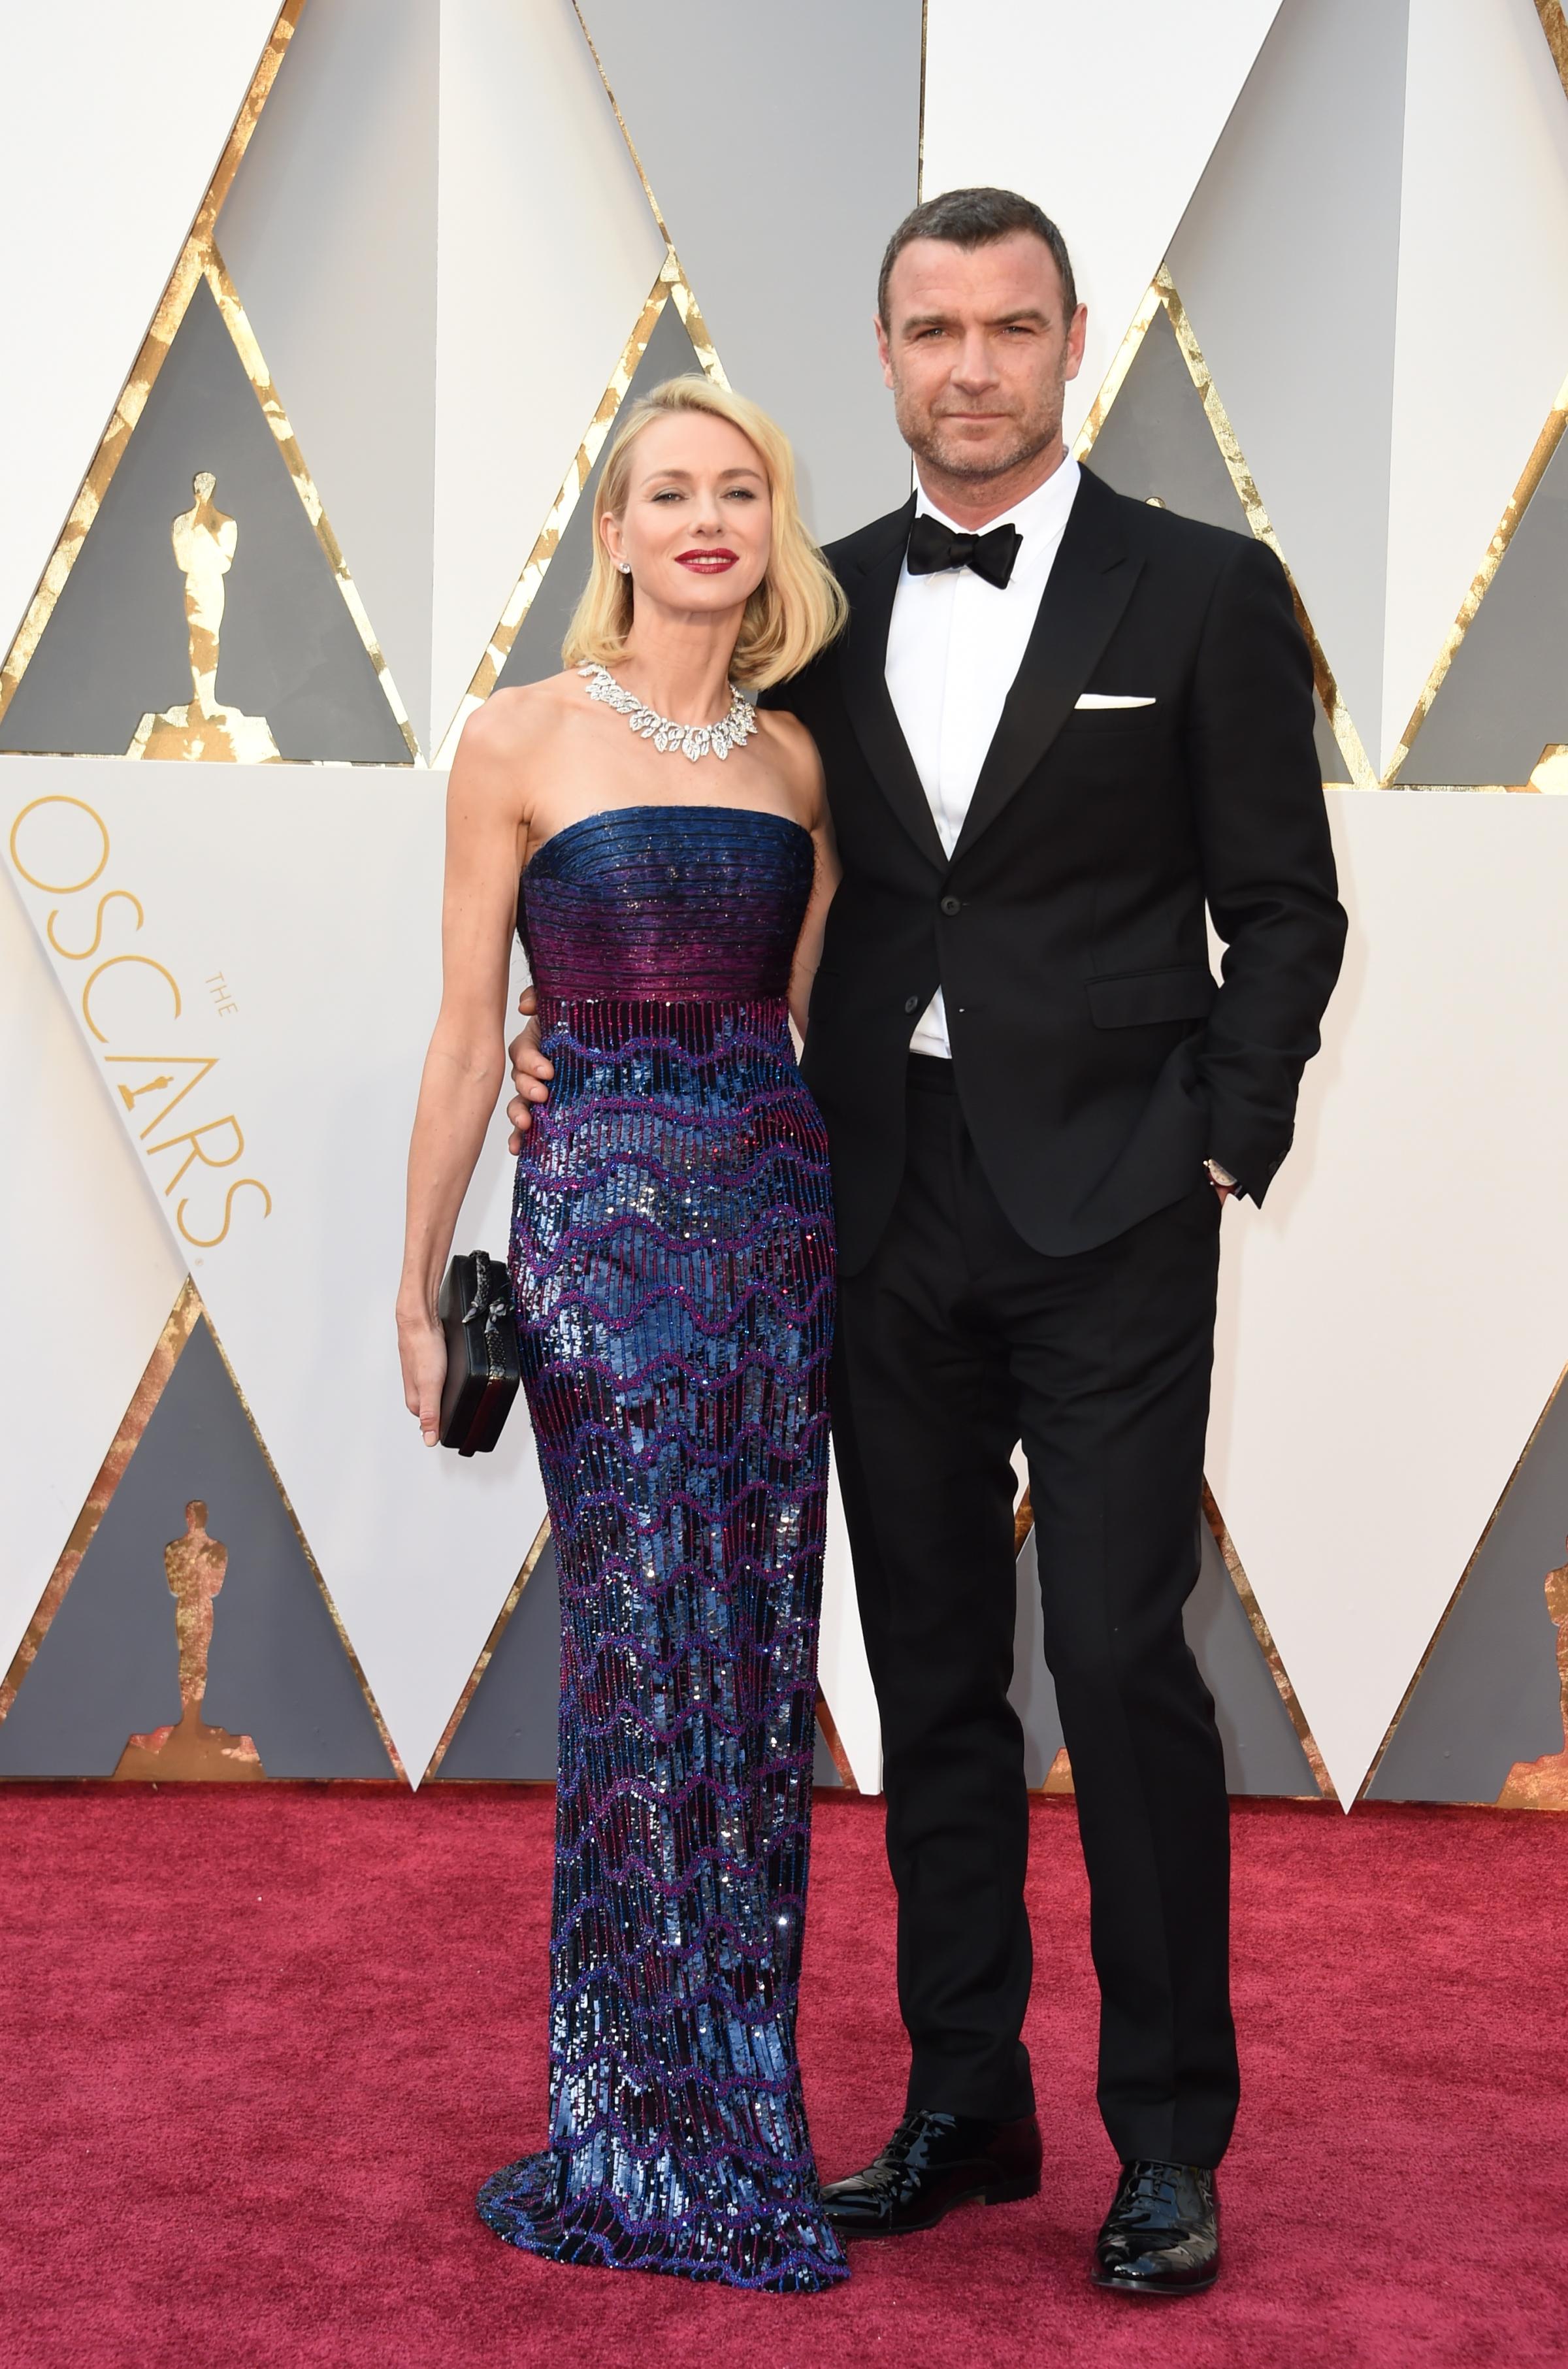 Naomi Watts and Liev Schreiber attend the 88th Annual Academy Awards on Feb. 28, 2016 in Hollywood, Calif.